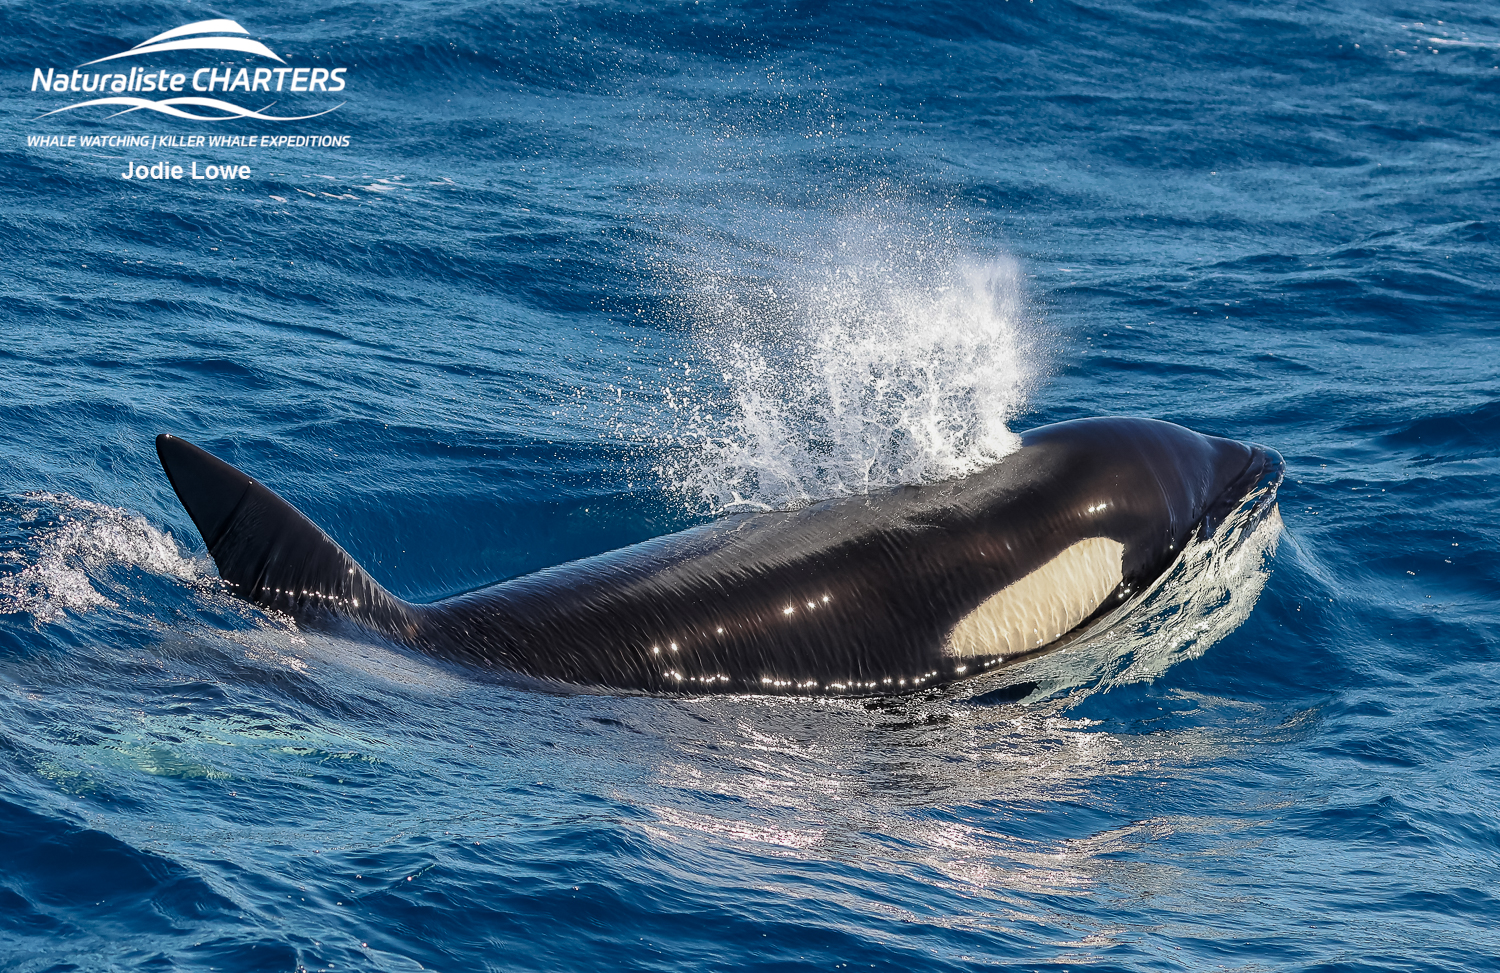 Orca surging in the southern ocean on the hunt